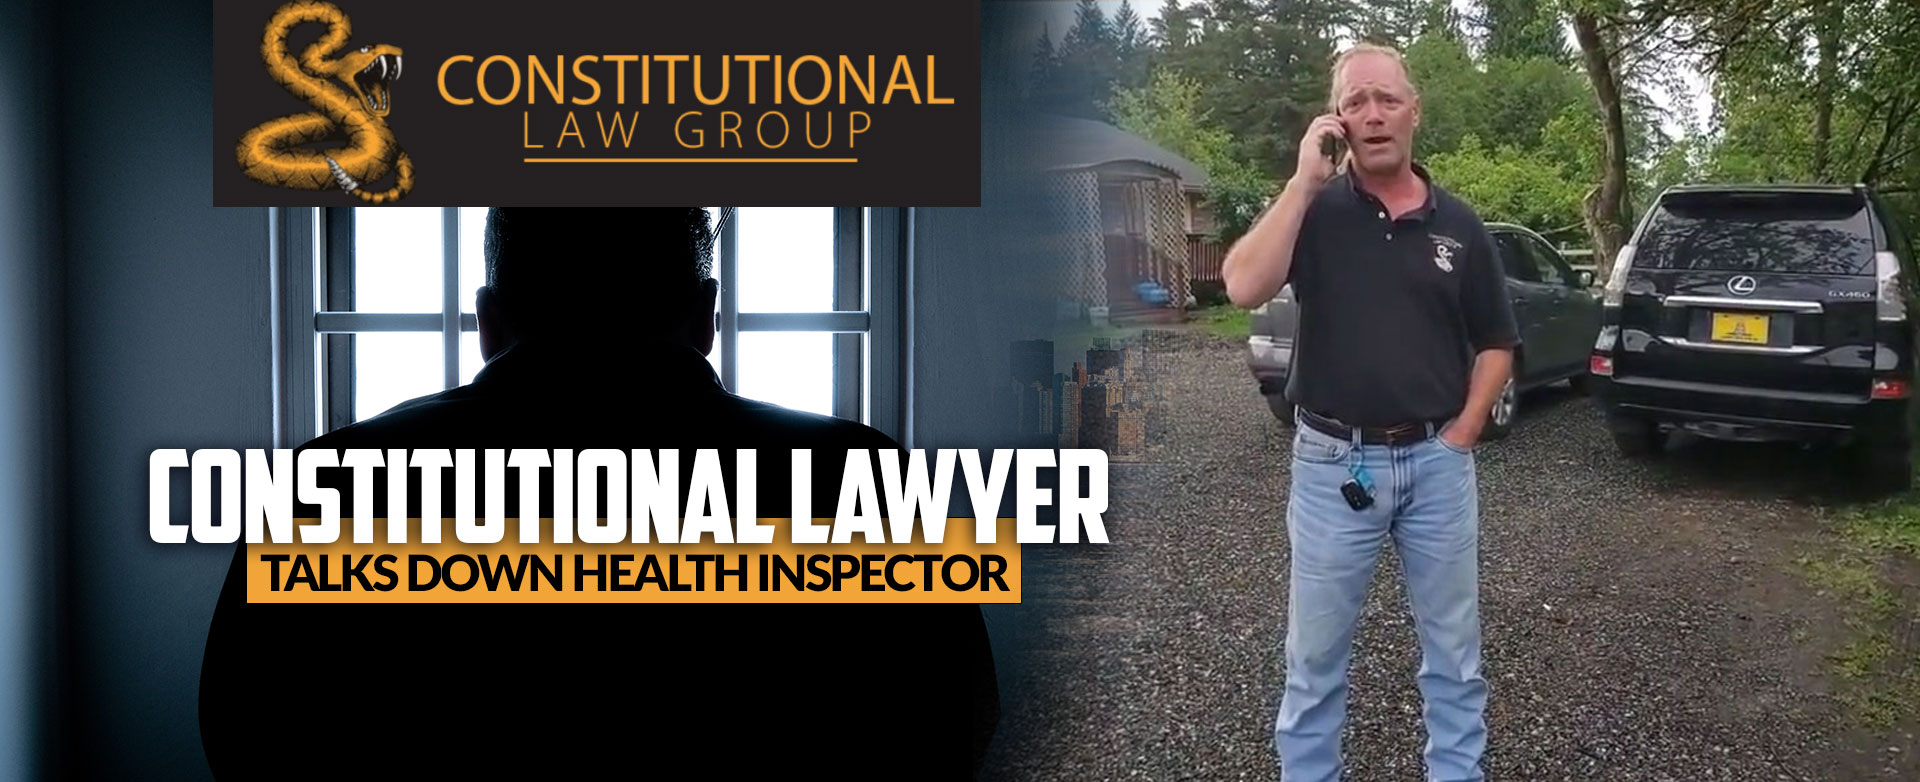 MyPatriotsNetwork-Constitutional Lawyer Talks Down Health Inspector In 5 Minutes